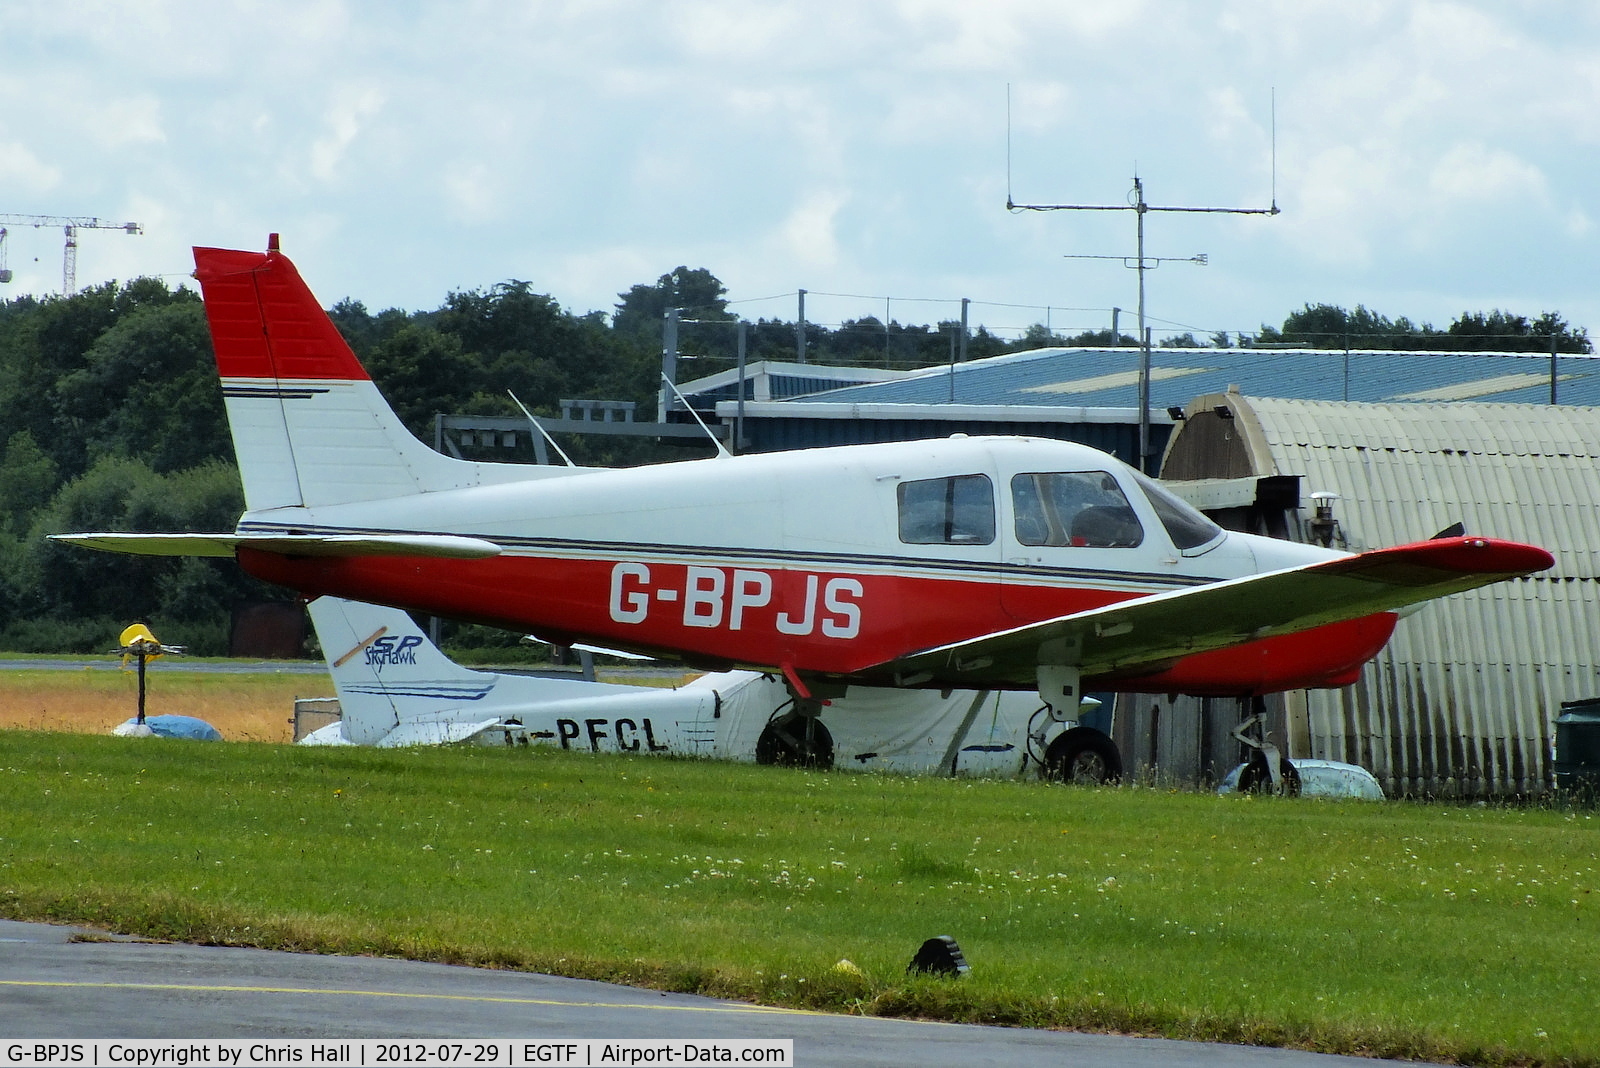 G-BPJS, 1988 Piper PA-28-161 Cadet C/N 2841025, ex Cabair PA-28, now operated by Redhill Air Services Ltd